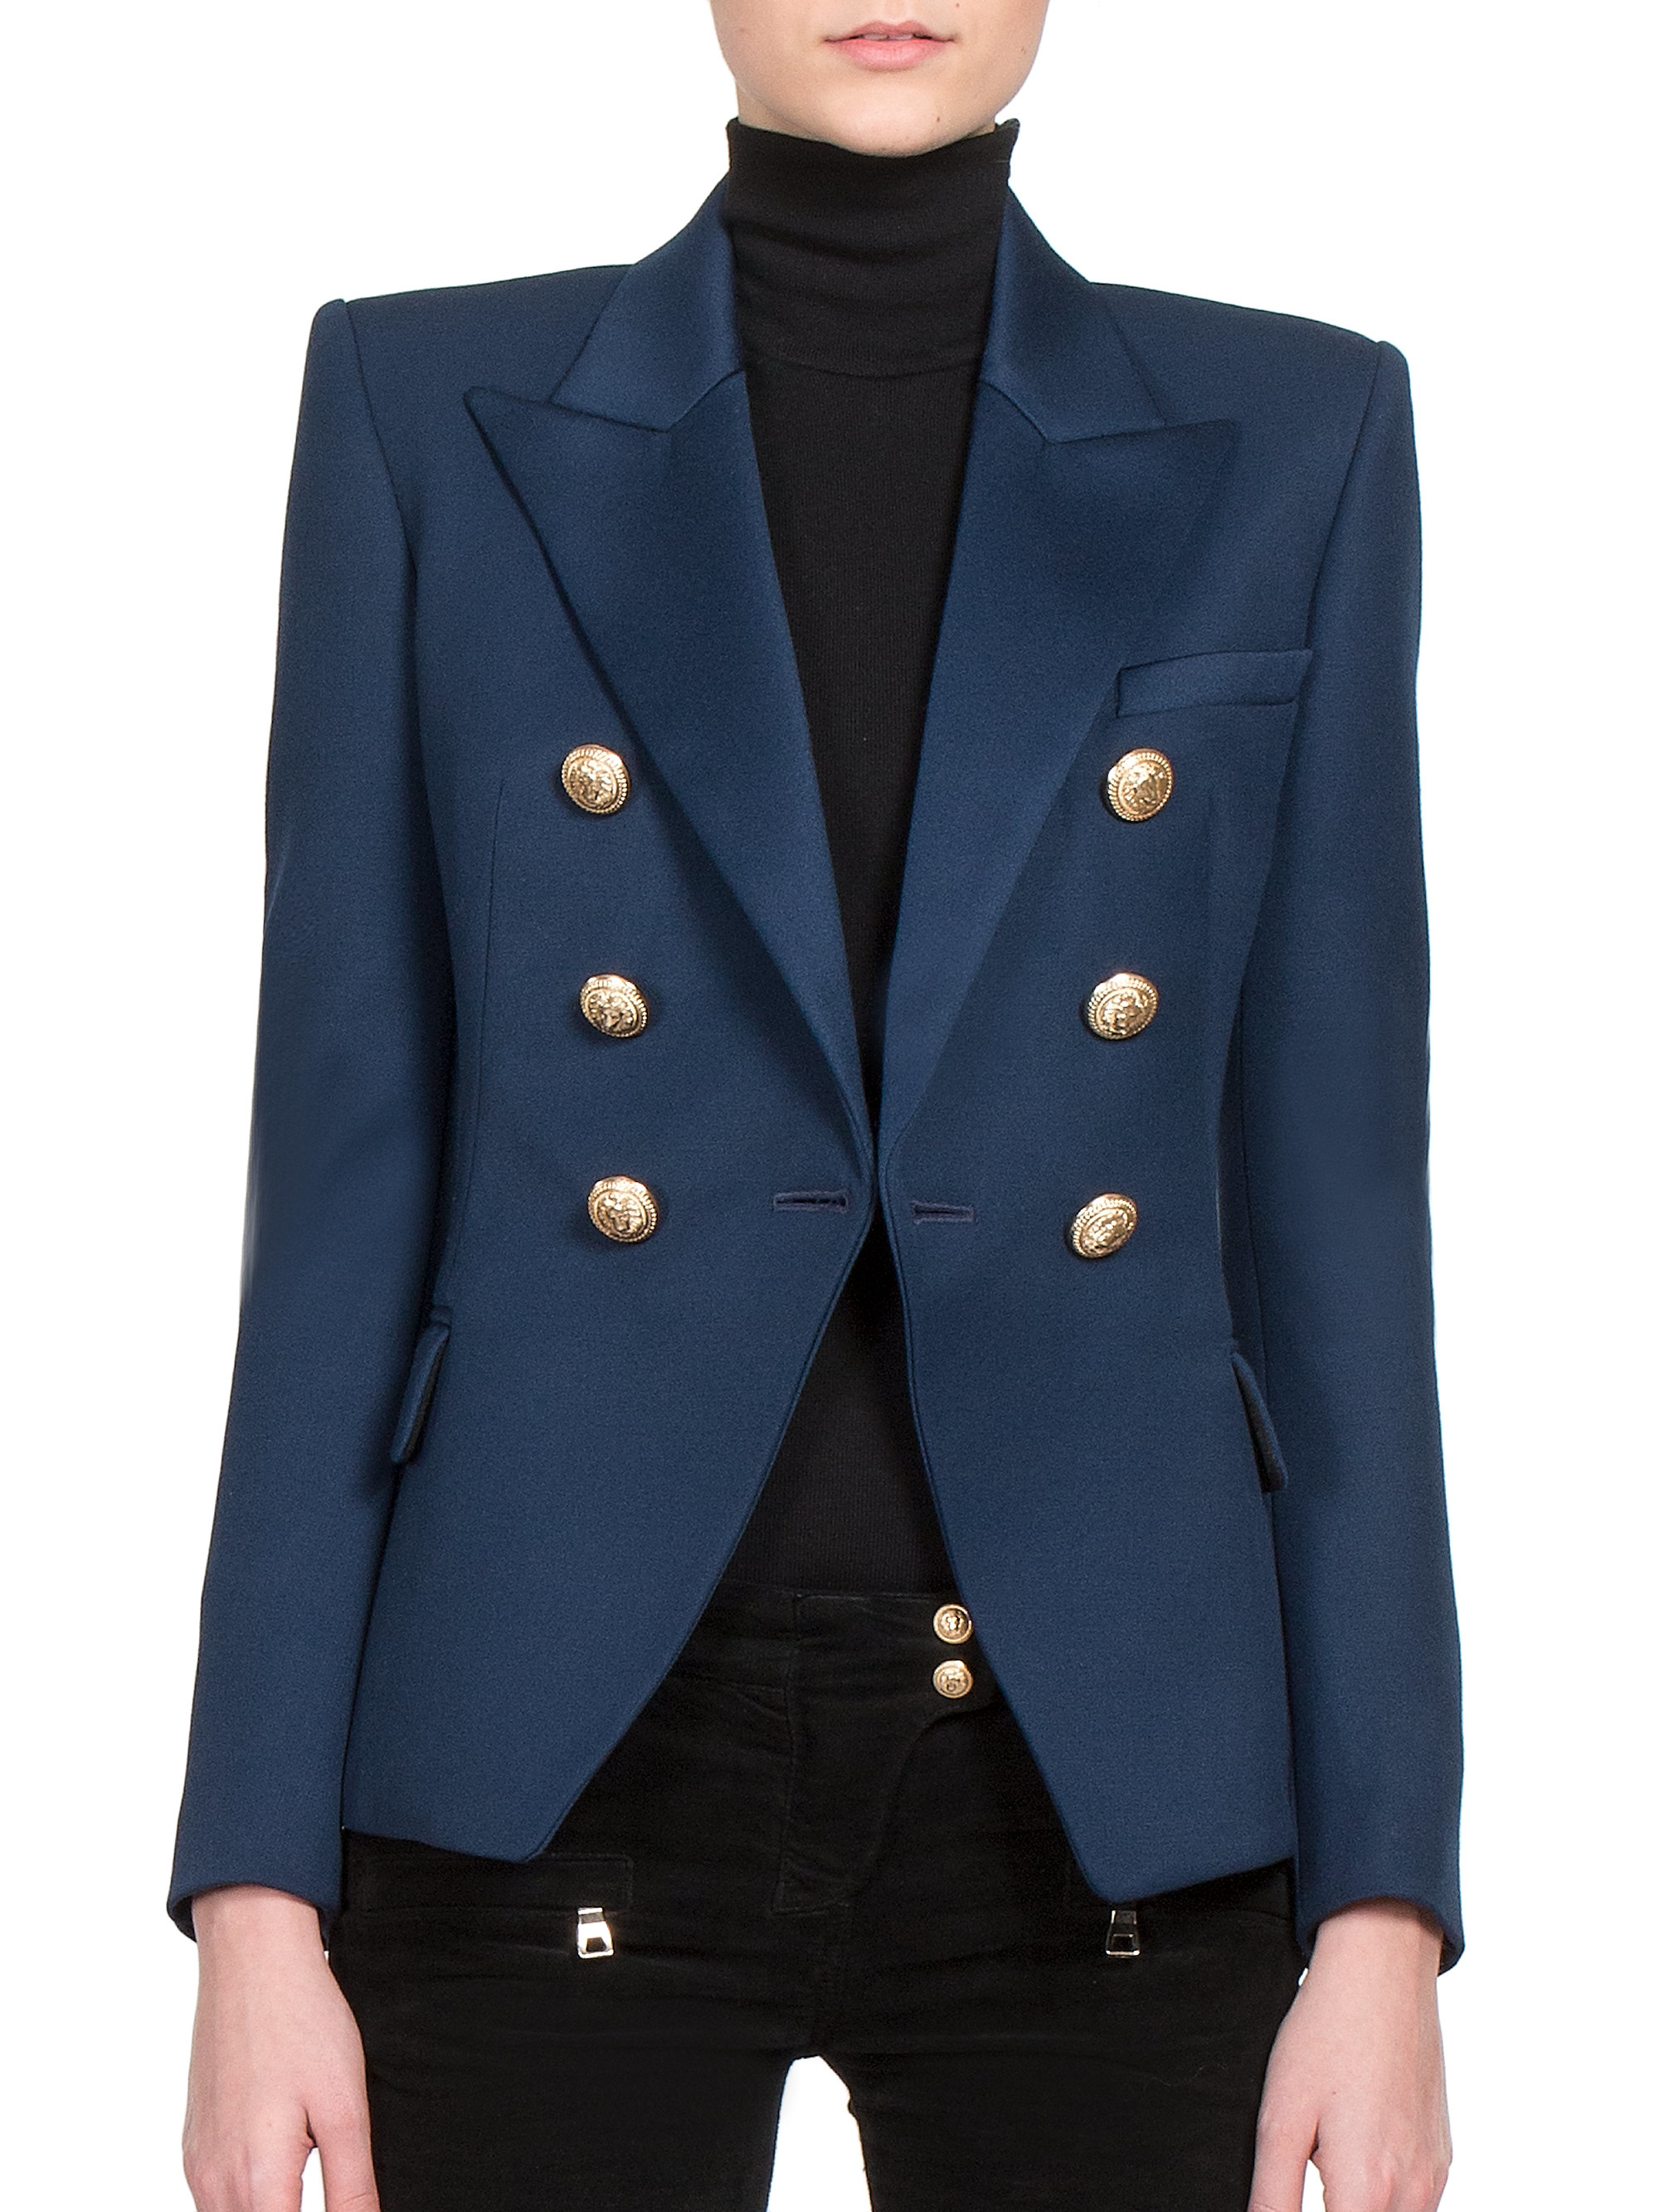 Balmain Double-Breasted Cotton-Piqué Jacket in Blue - Lyst